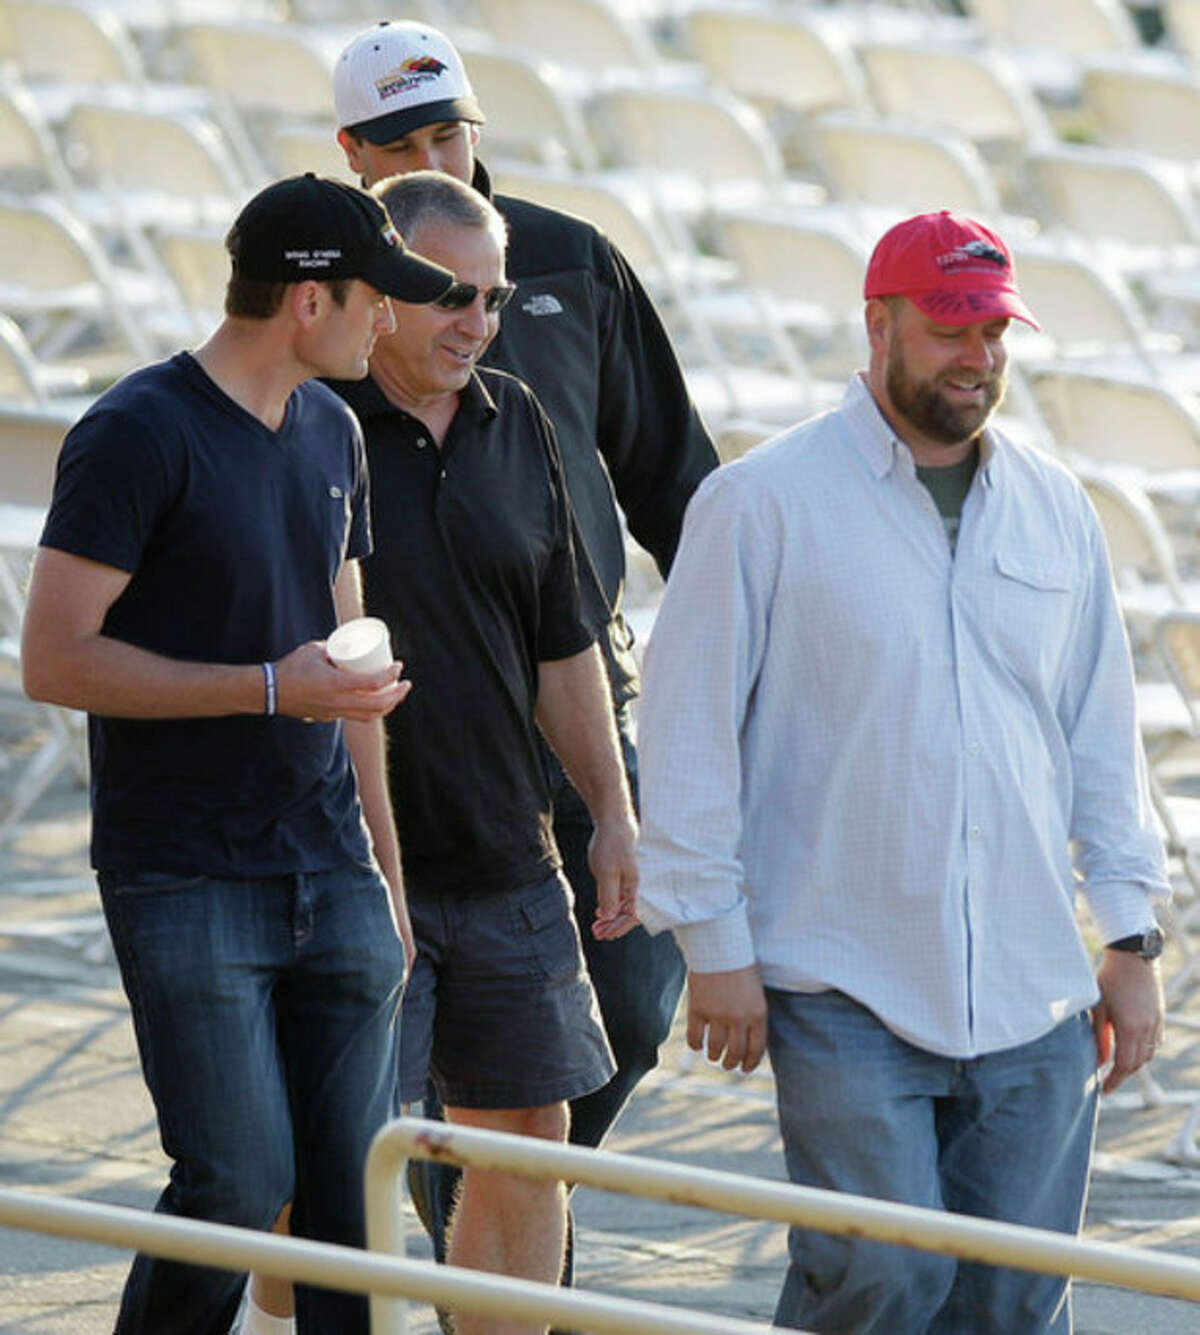 I'll Have Another trainer Doug O'Neill, right, walks in the stands during a morning workout at Pimlico Race Course, Friday, May 18, 2012, in Baltimore. The Preakness Stakes horse race takes place Saturday at Pimlico. (AP Photo/Patrick Semansky)